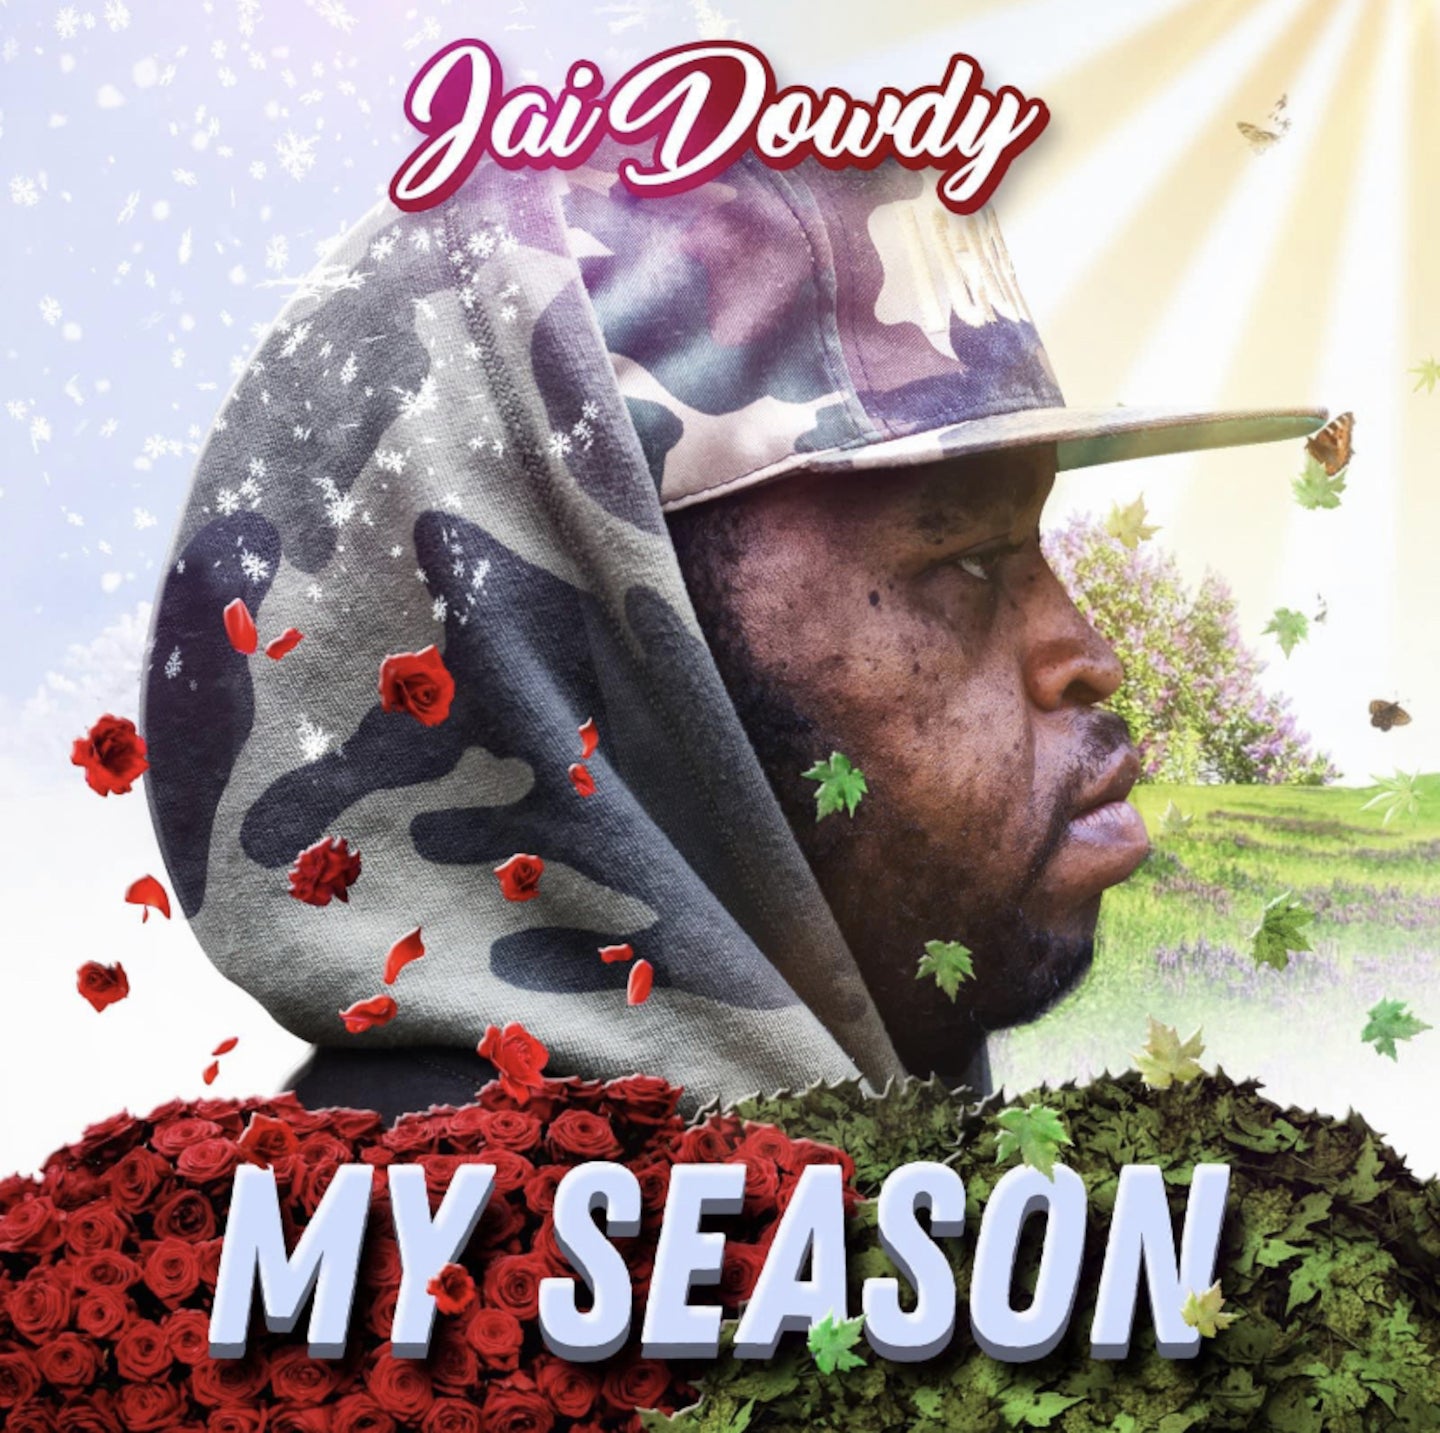 My Season - Jai Dowdy - 12. Put Yourself In Her Shoes ft. Jeremy Tutt